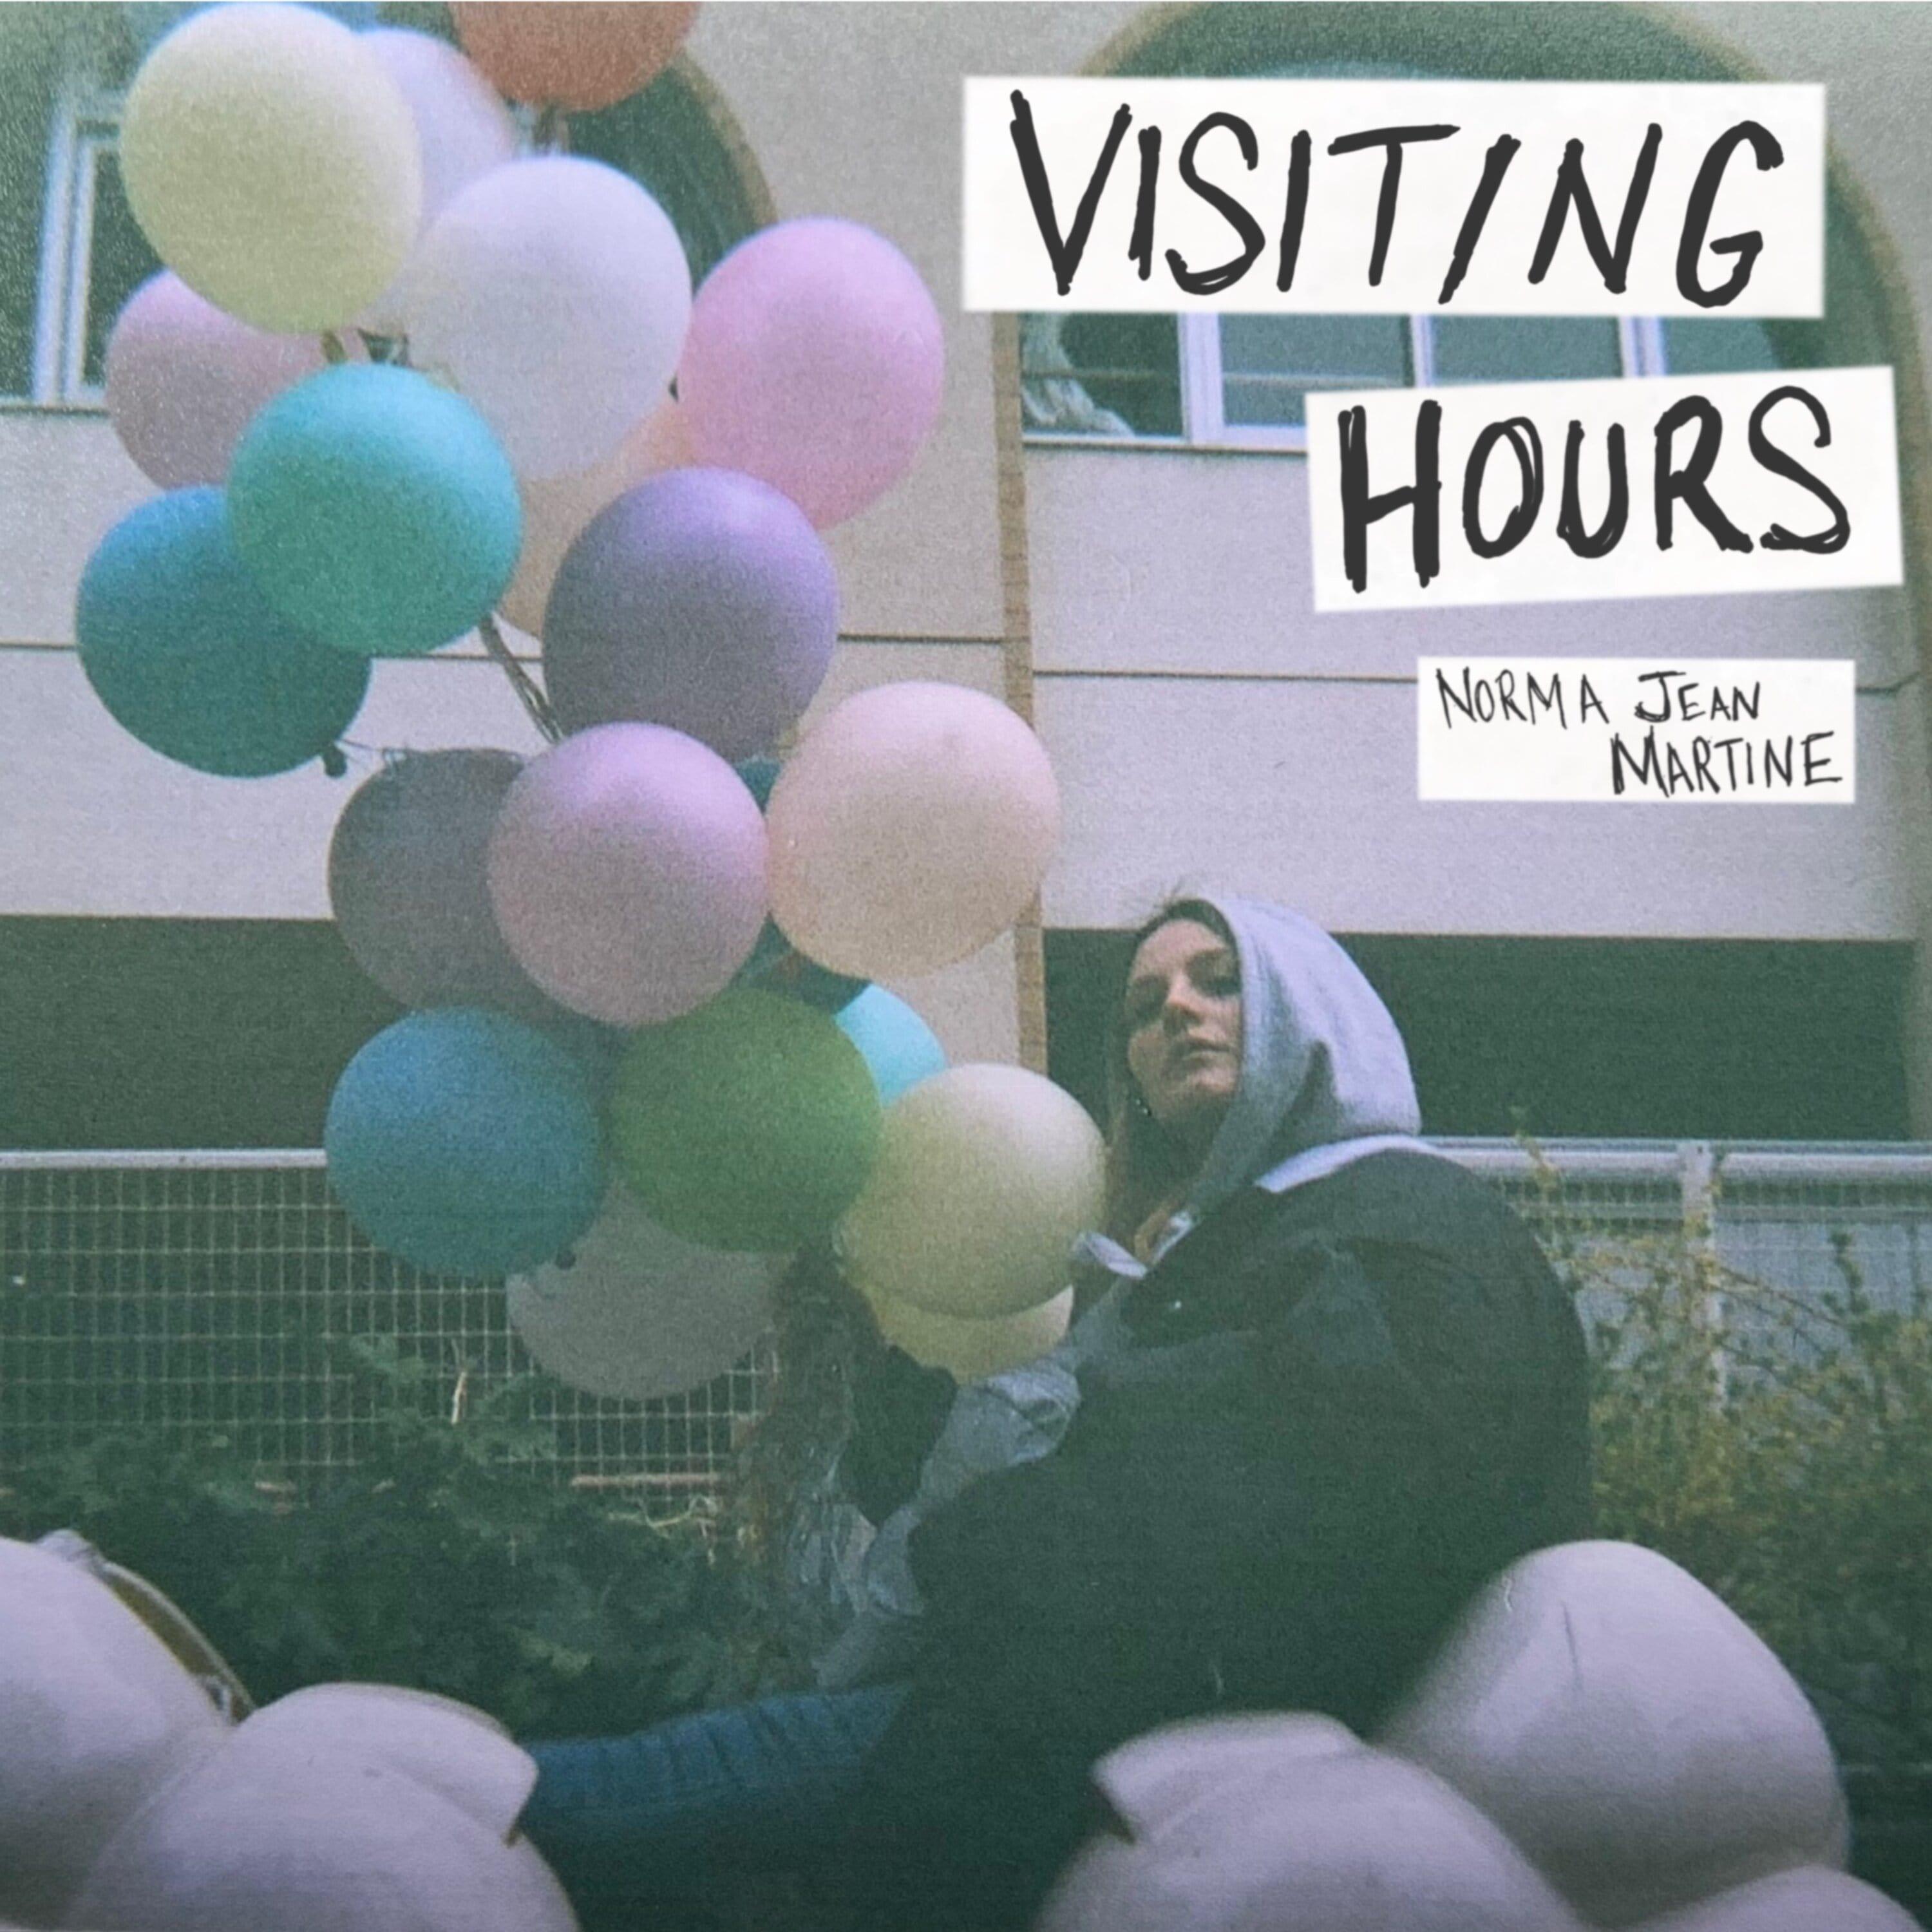 Norma Jean Martine - VISITING HOURS